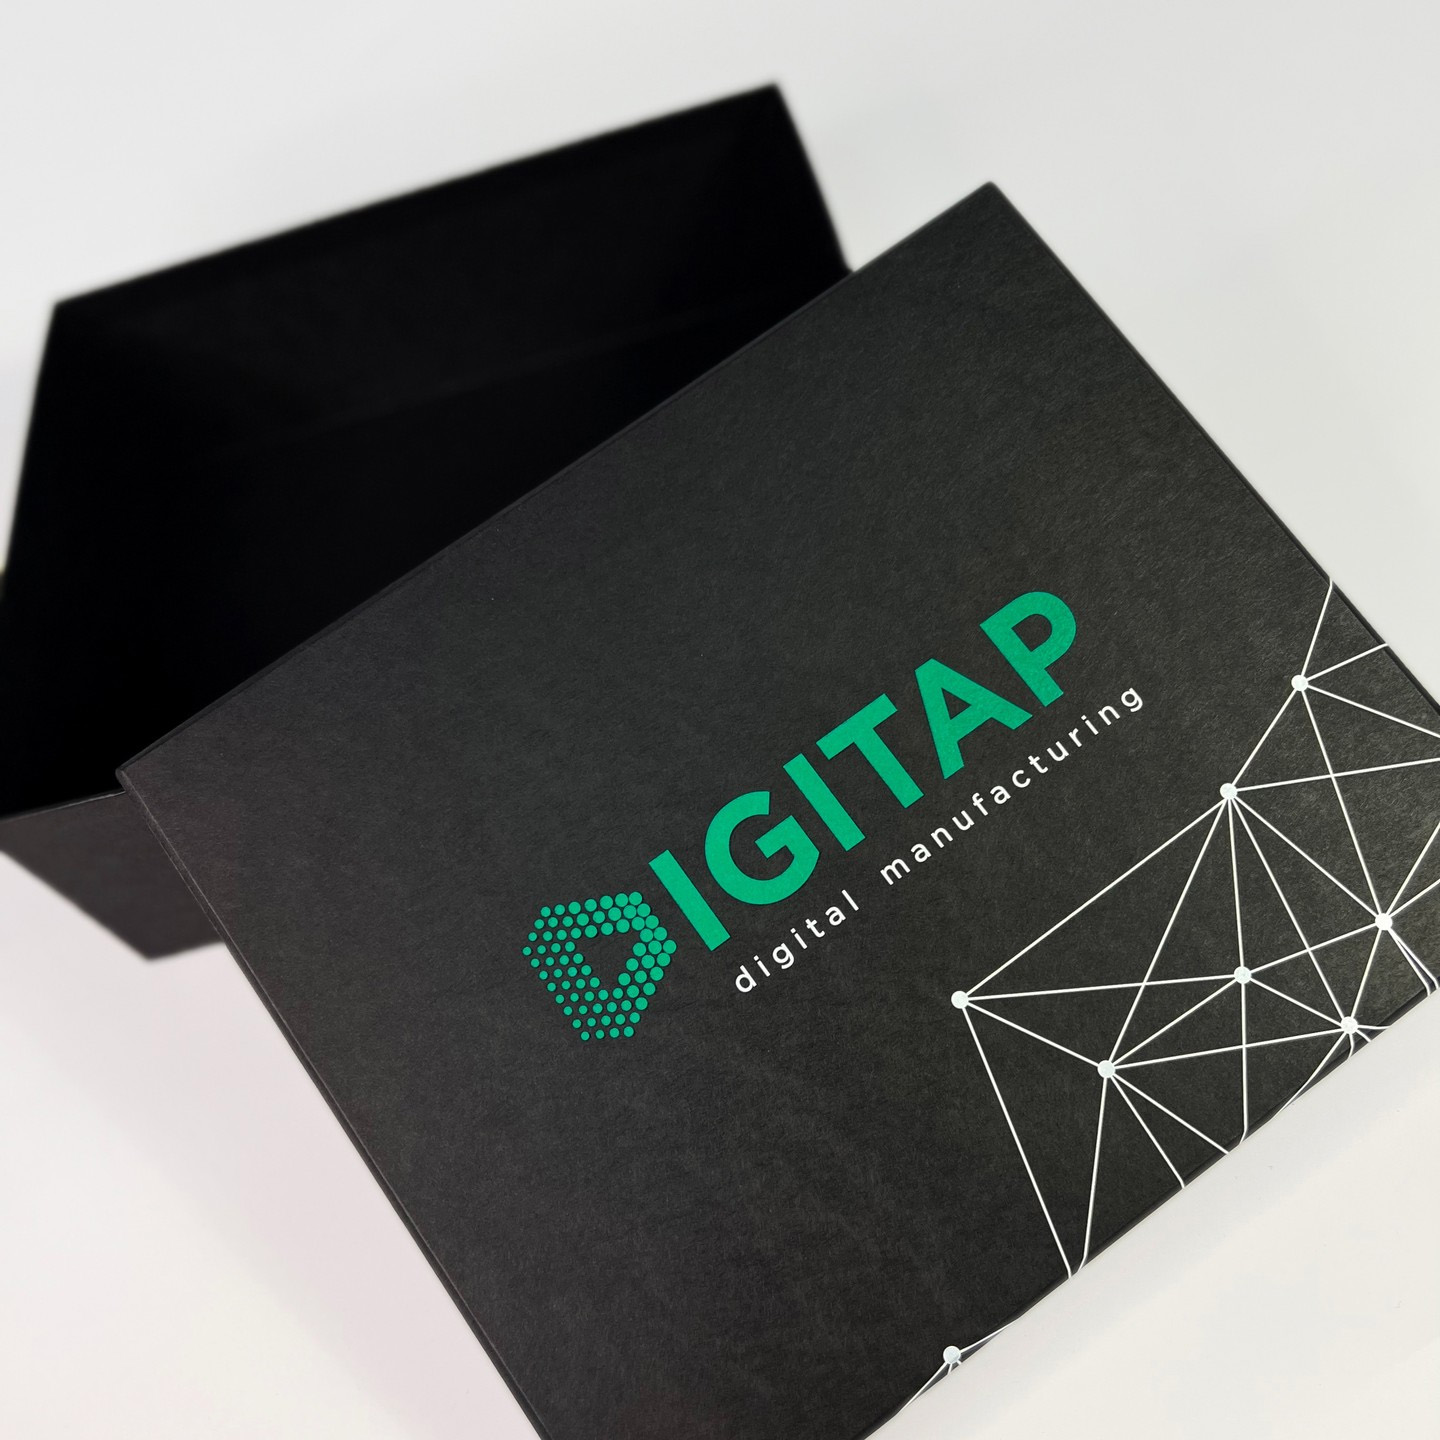 Boxes for the Digitap company 3